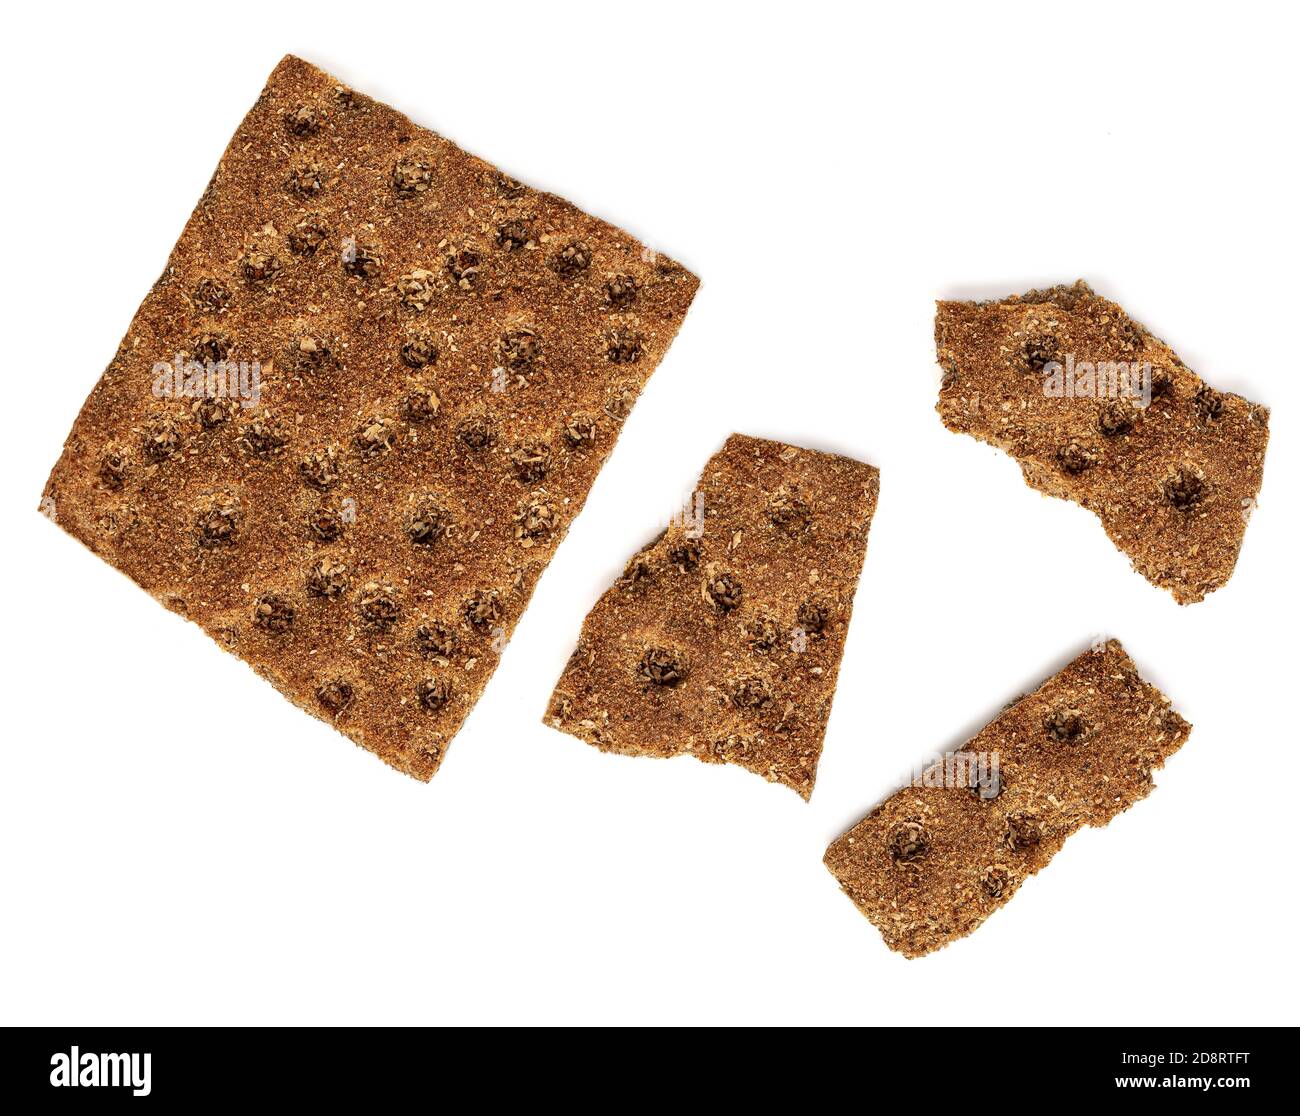 Rye crispy crackers  isolated on white background. Crushed dry wholegrain cracker pieces or flat bread. Top view Stock Photo